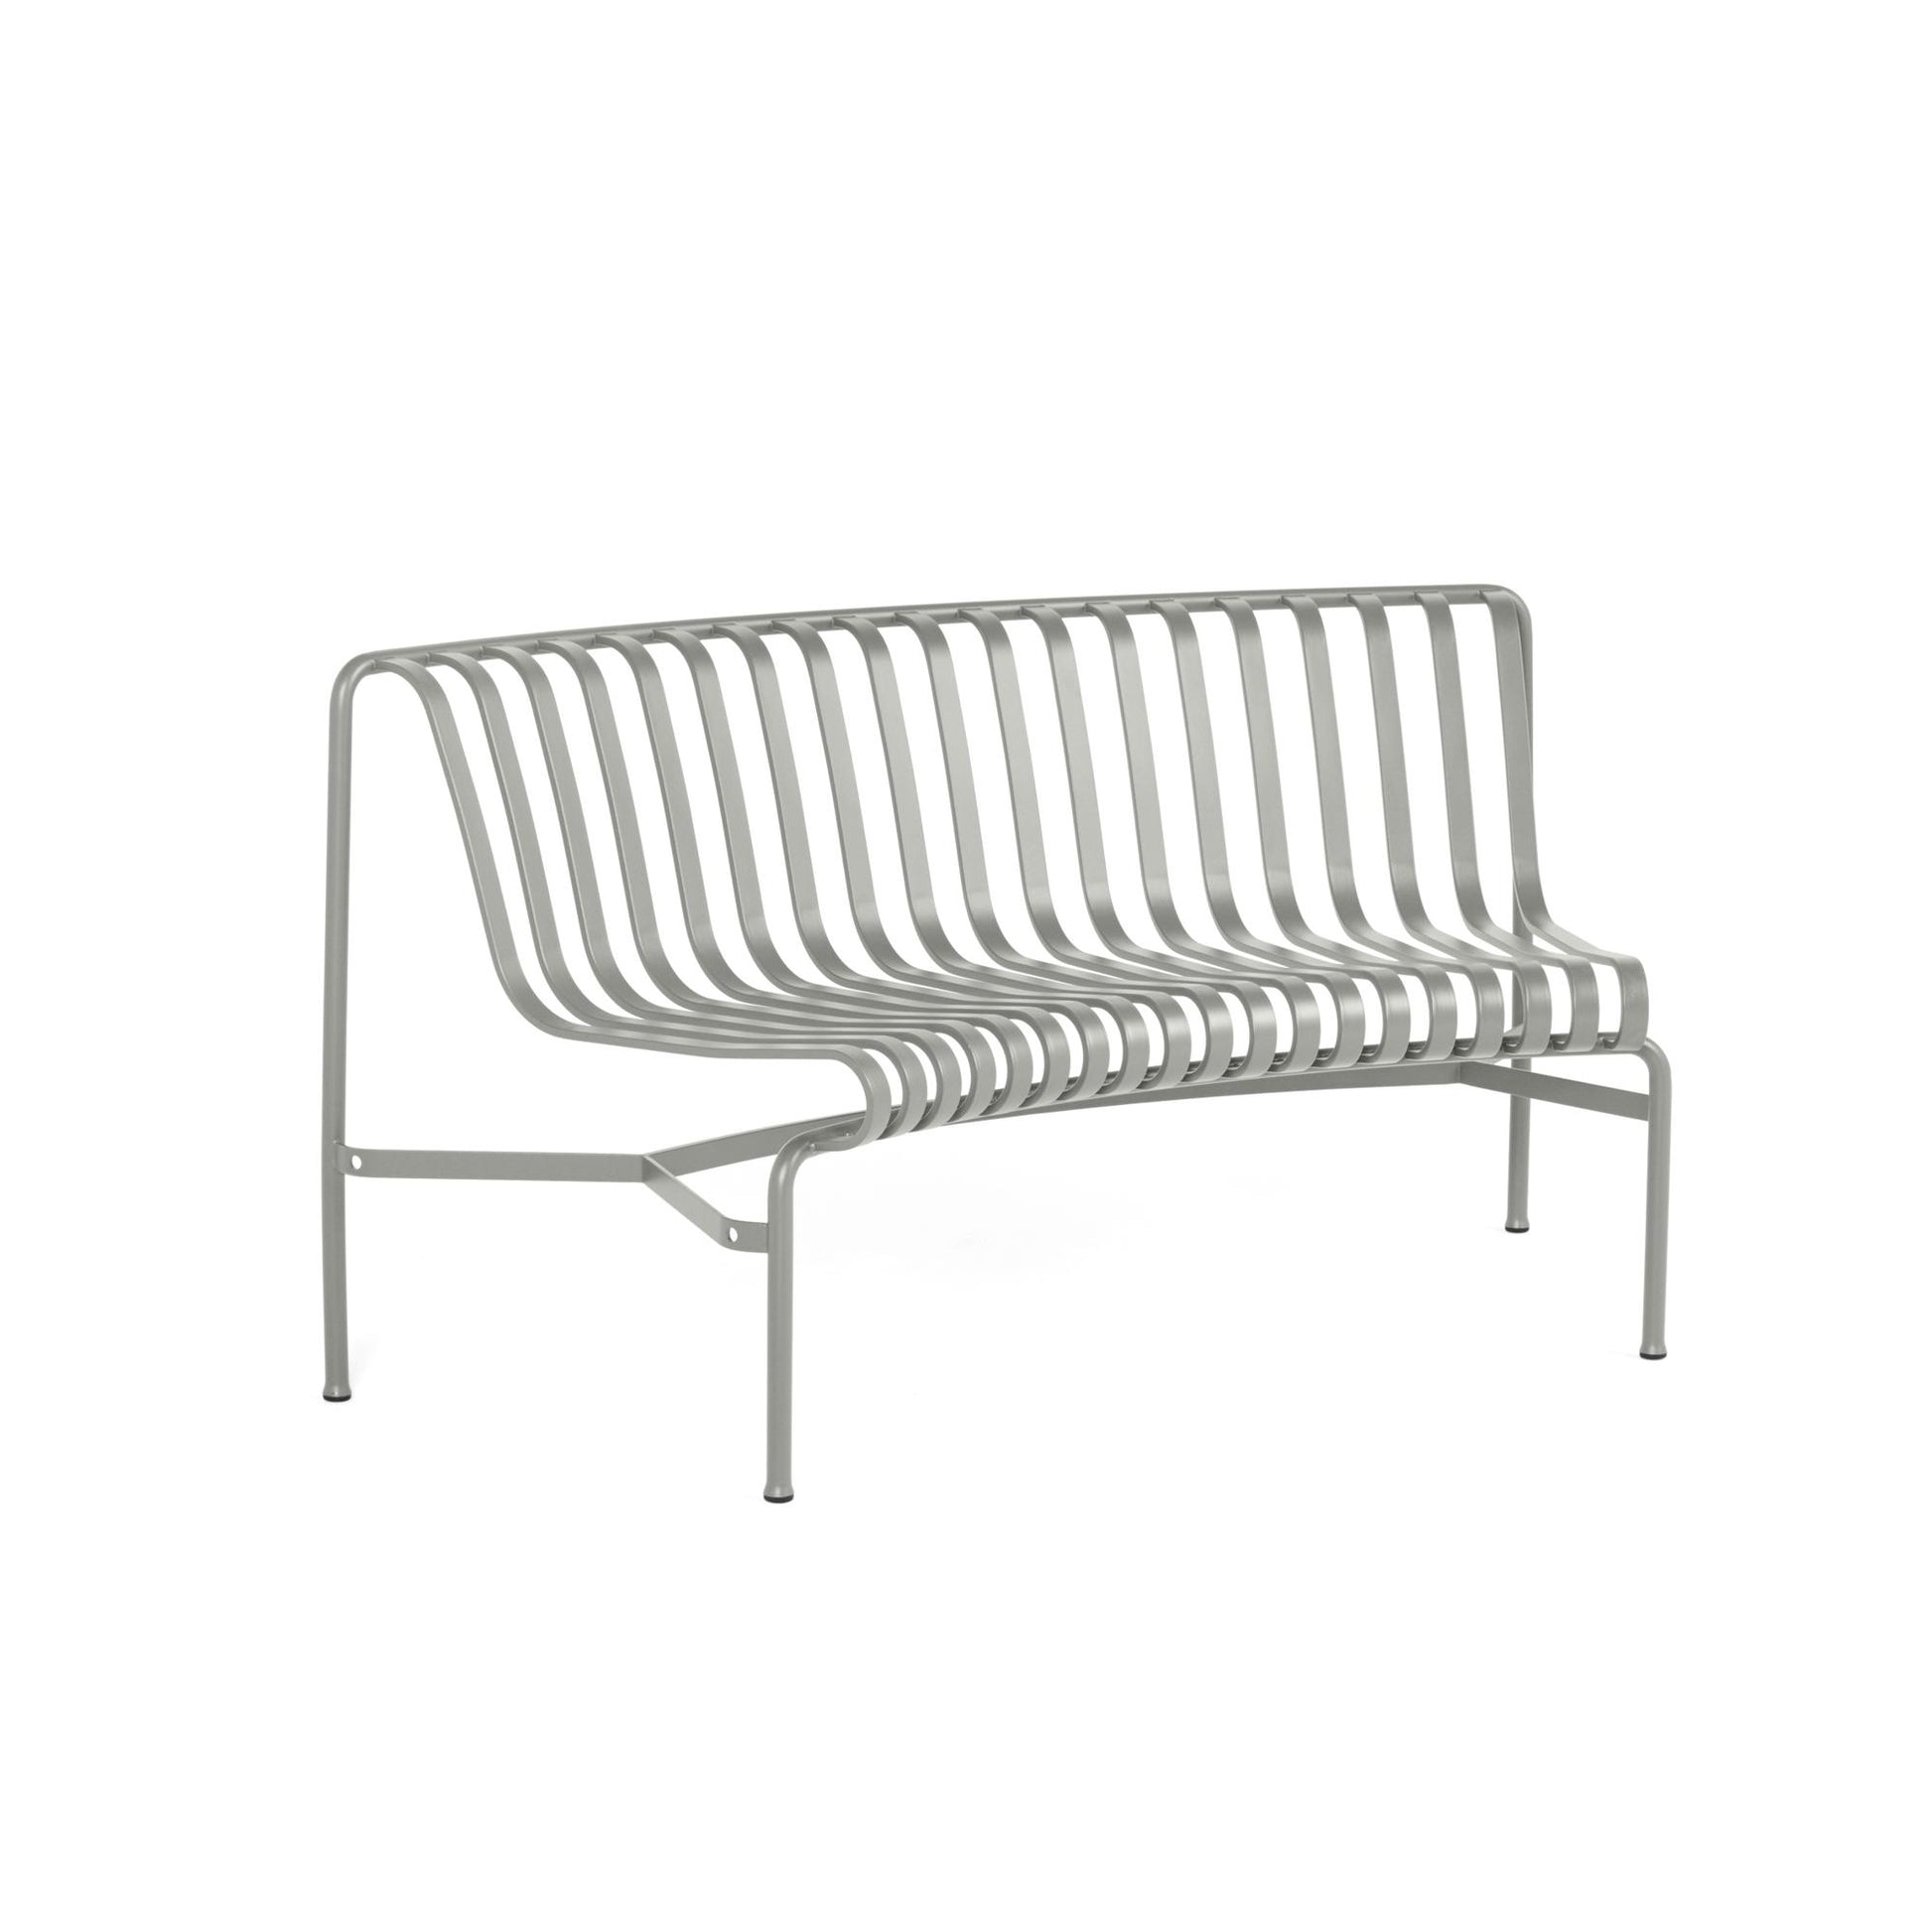 Palissade Park Dining Bench IN 1 Pc. Incl. Mounting Kit Not Freestanding by HAY #Cloud Gray